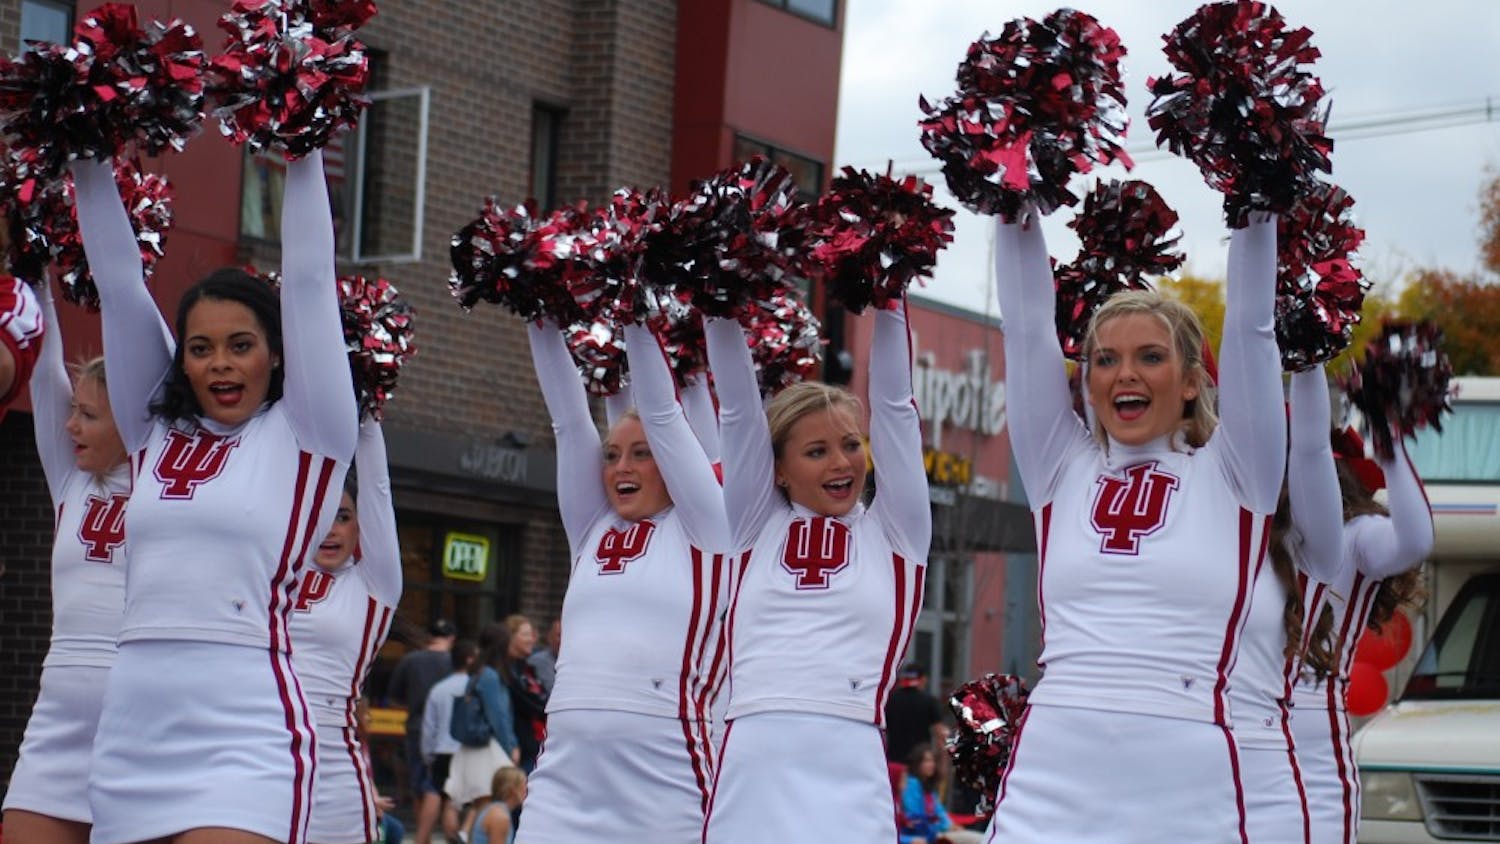 The IU Cheerleaders stop on Kirkwood to get the crowd spirit up. The parade concluded at Sample Gates with a pep rally.